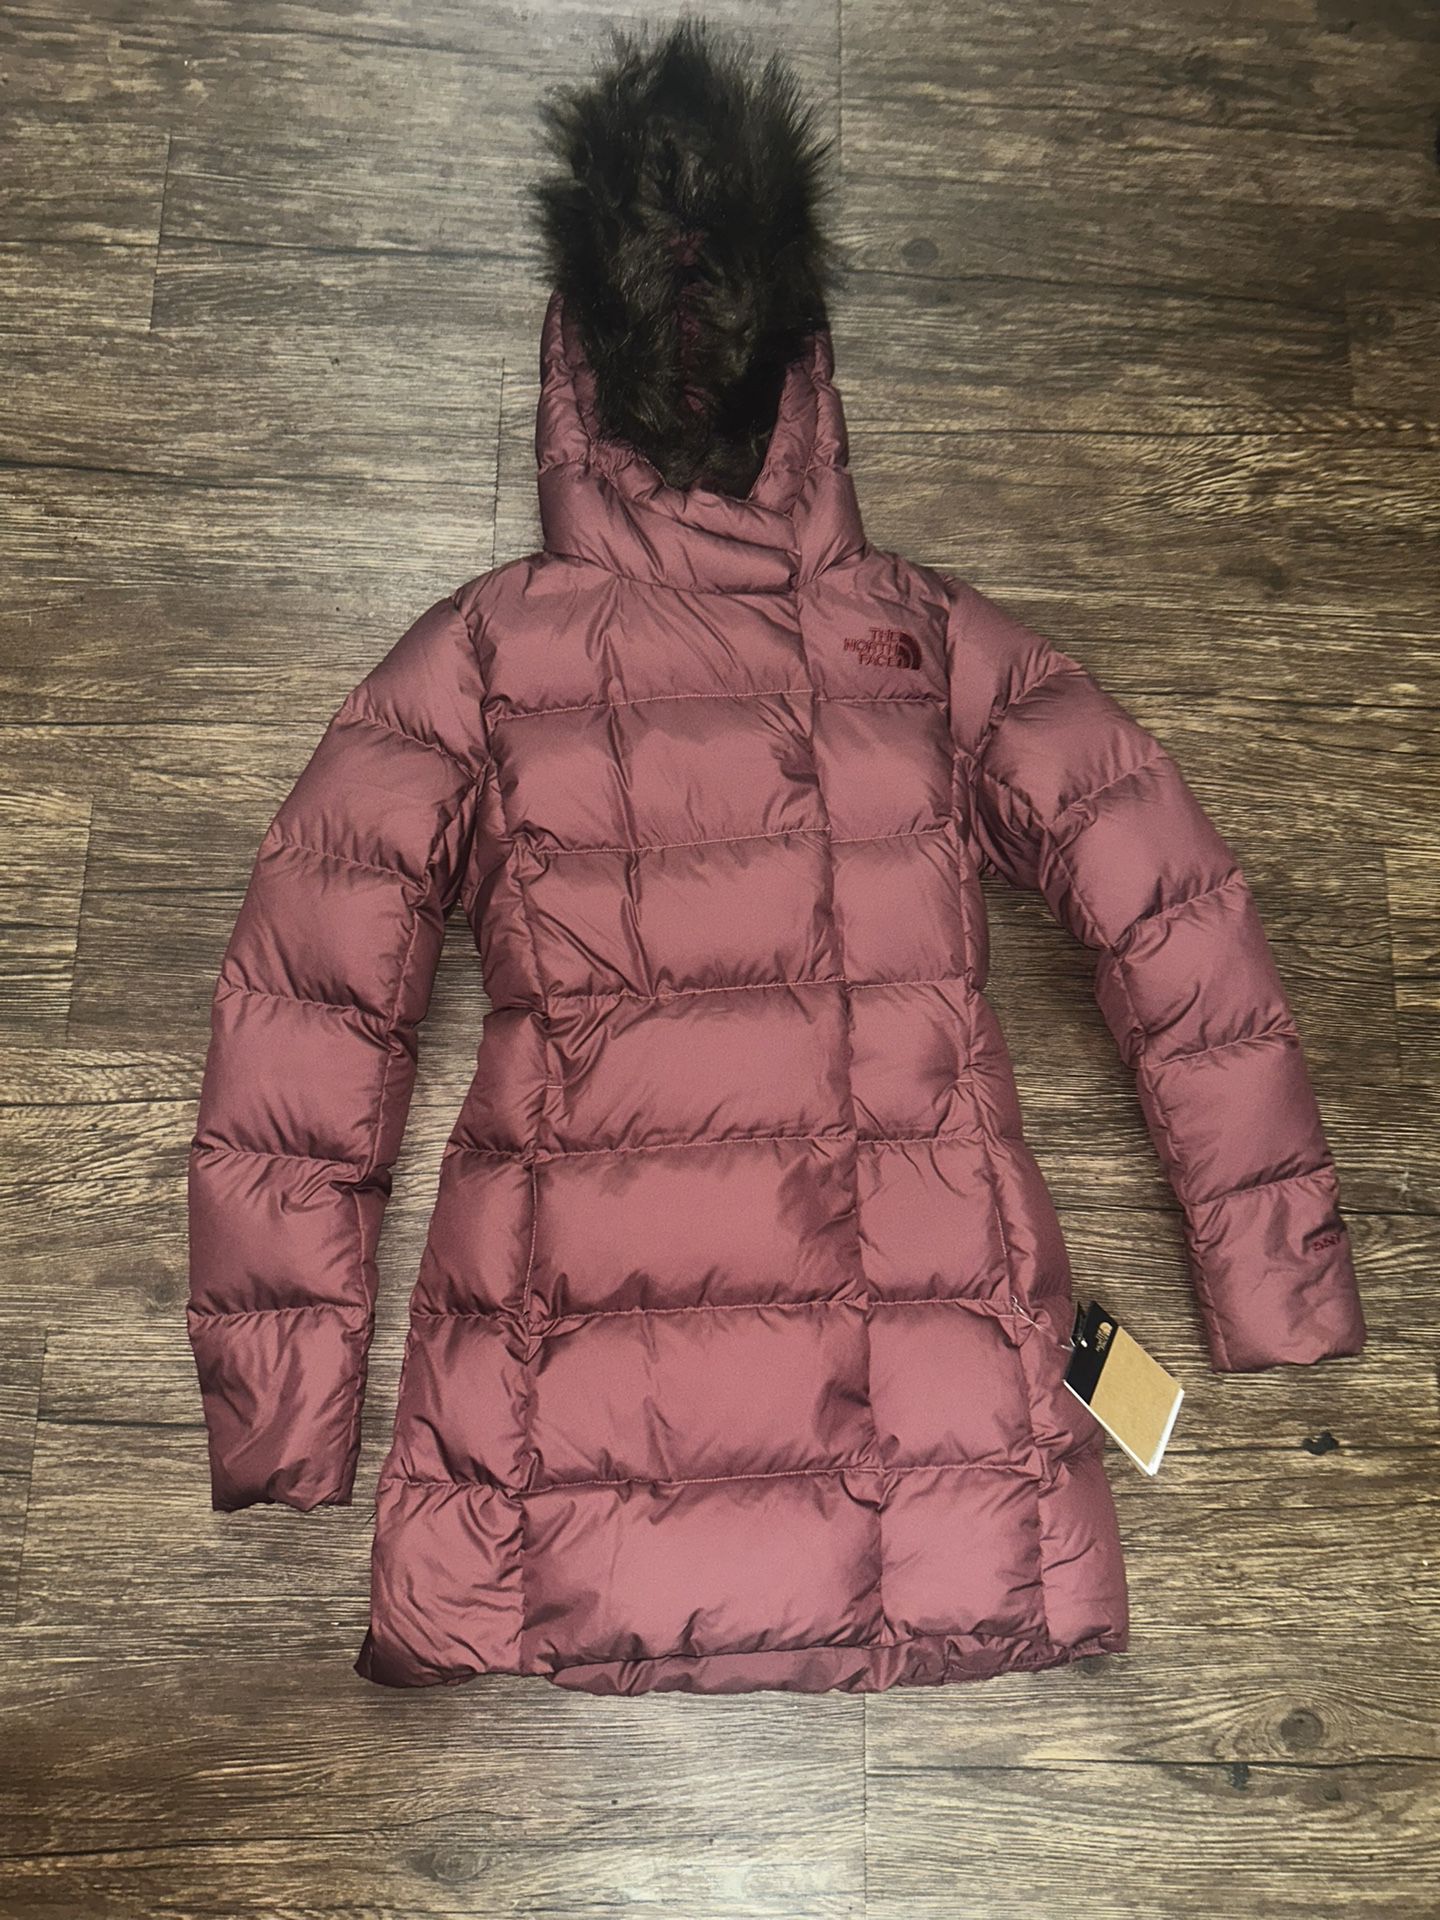 Female The North Face Winter Coats 